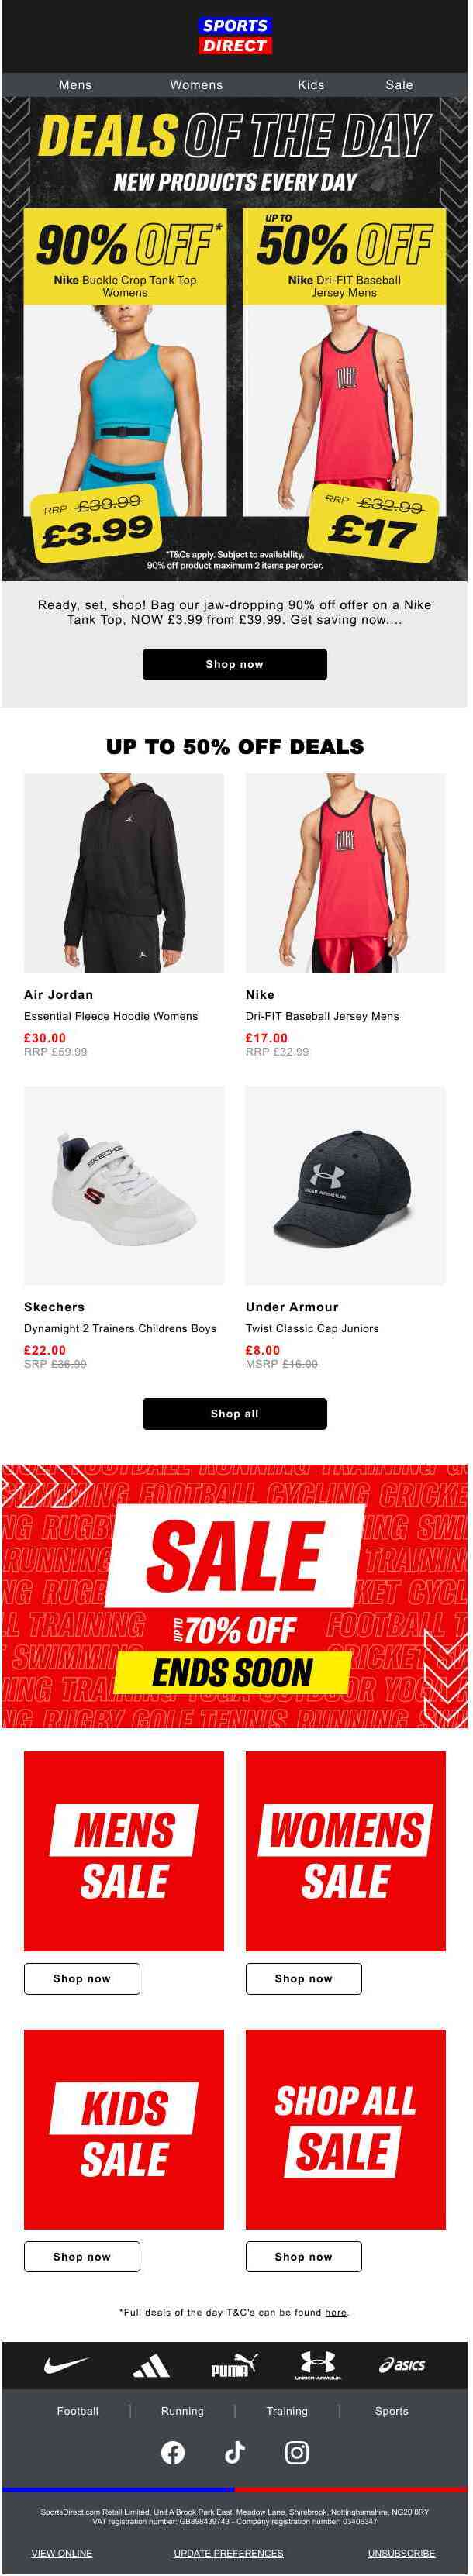 90% OFF Nike Deal for £3.99